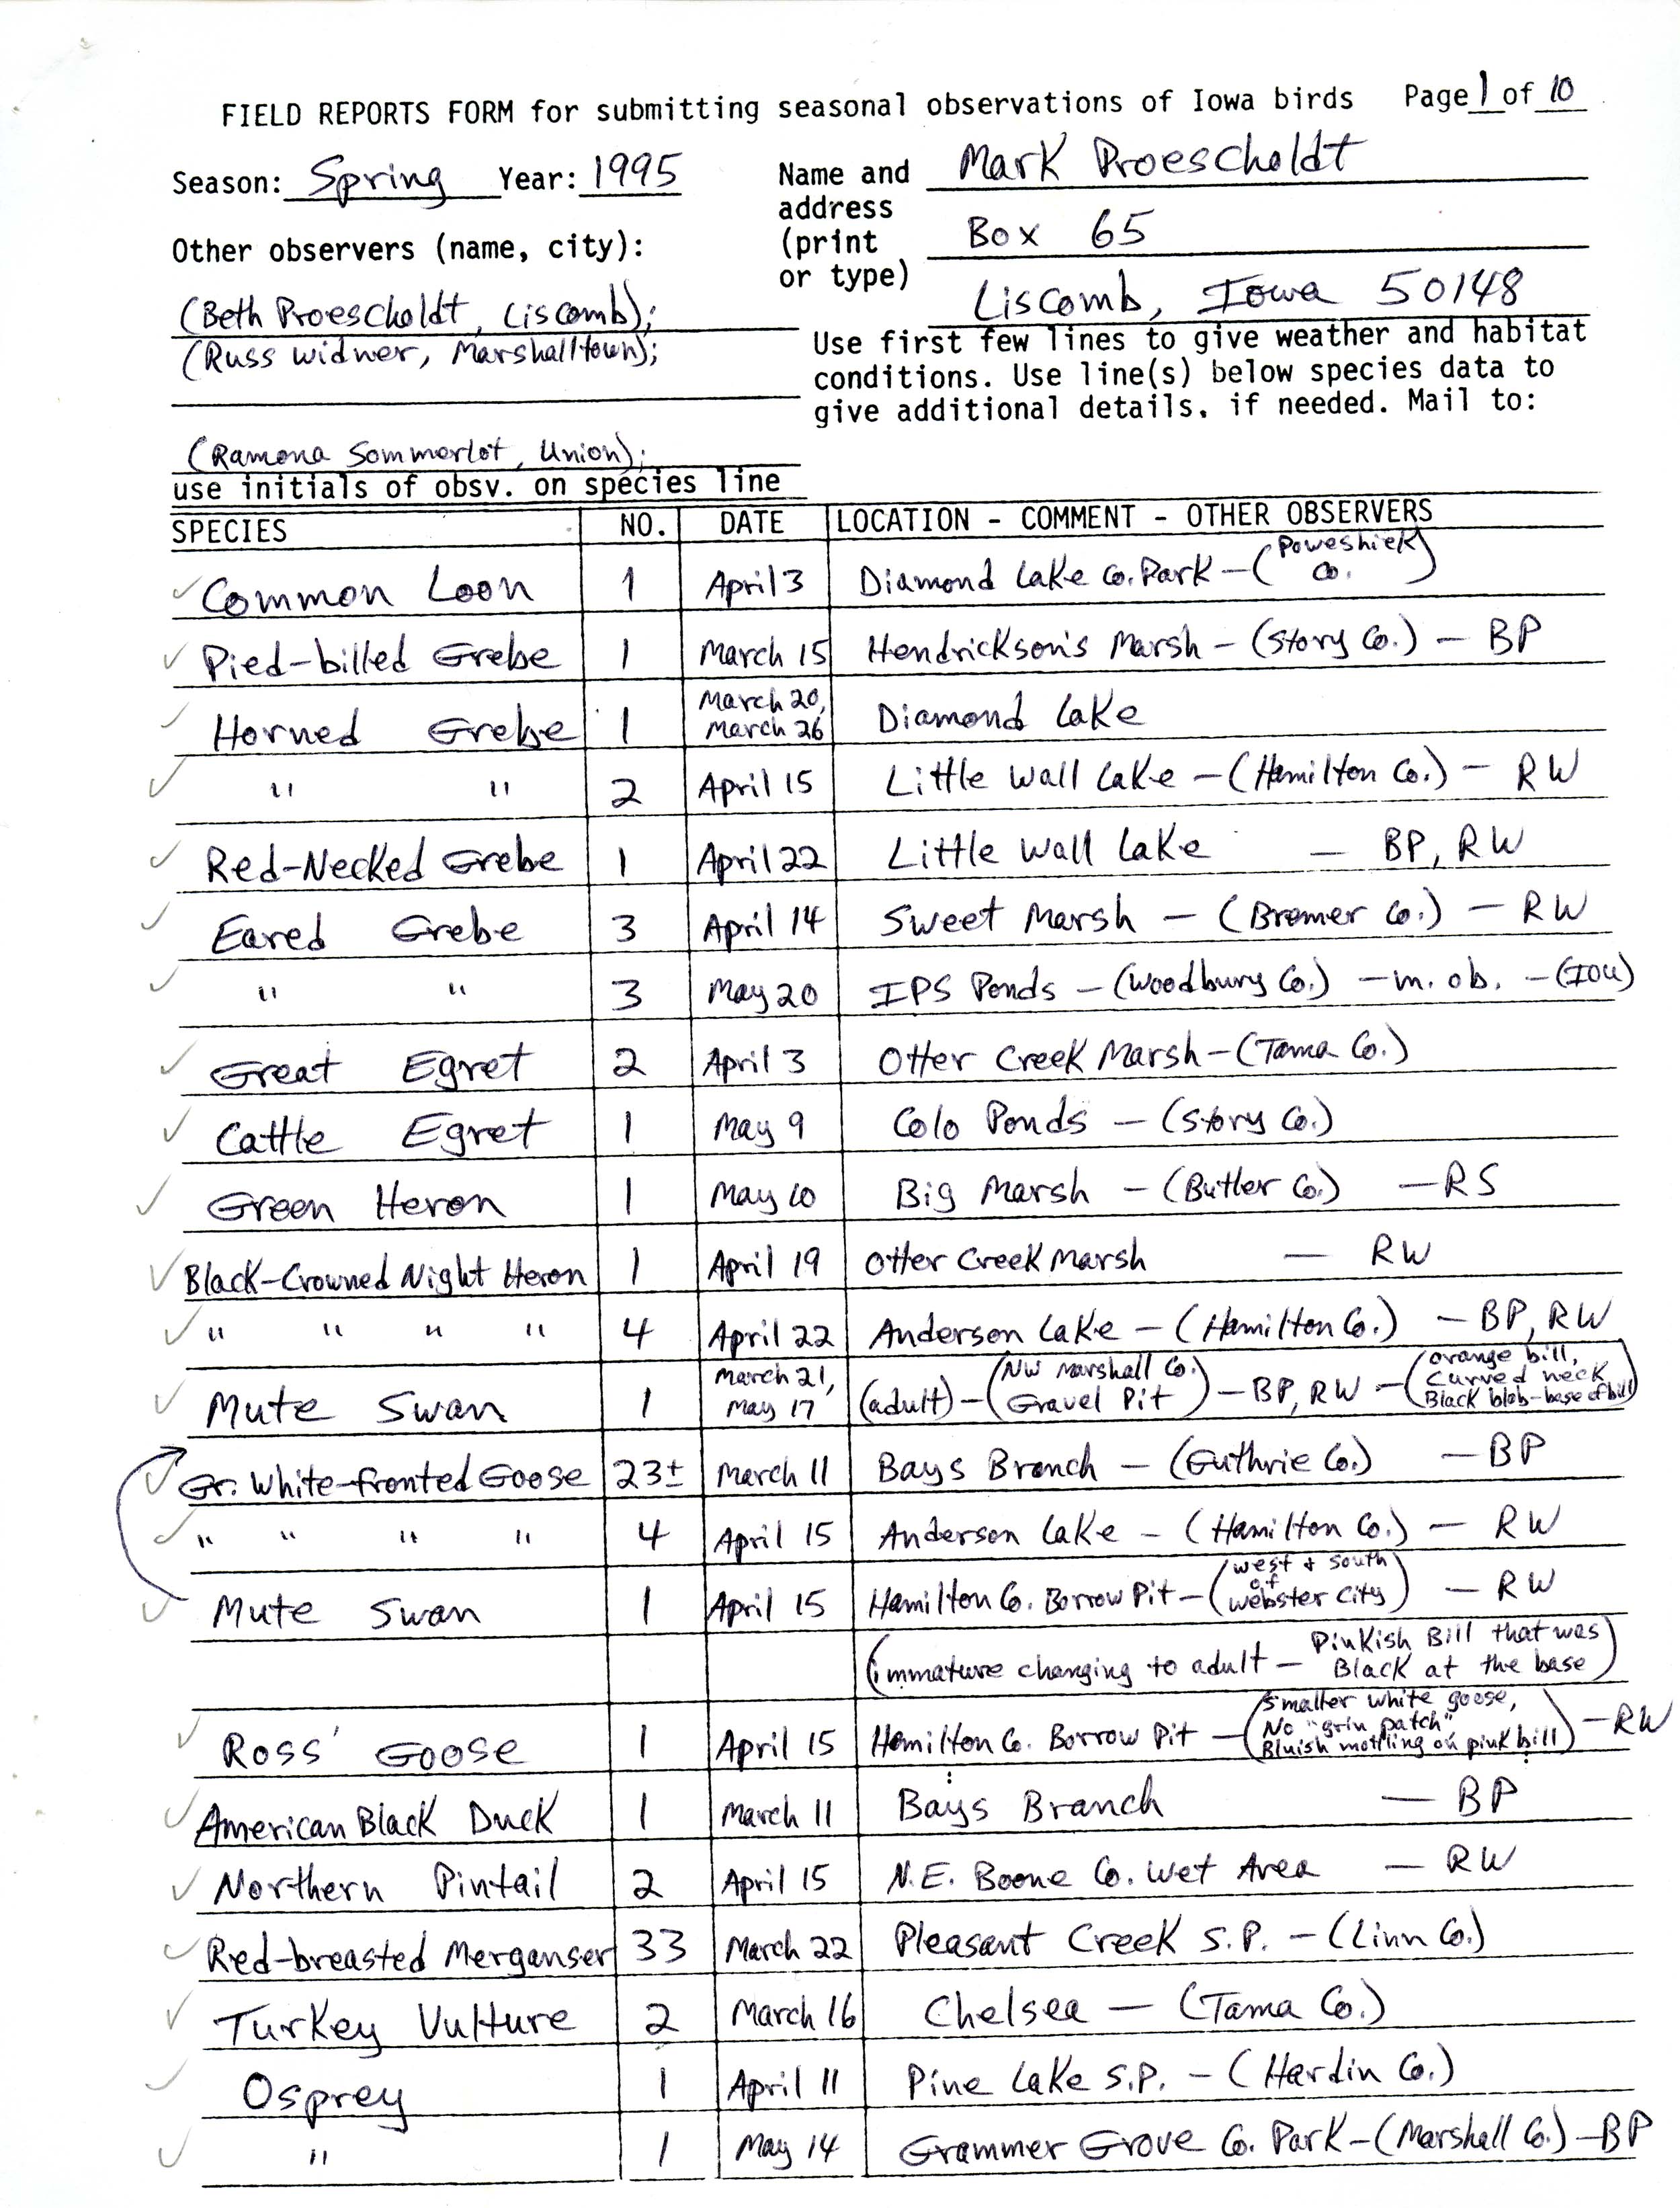 Field reports form for submitting seasonal observations of Iowa birds, spring 1995, Mark Proescholdt